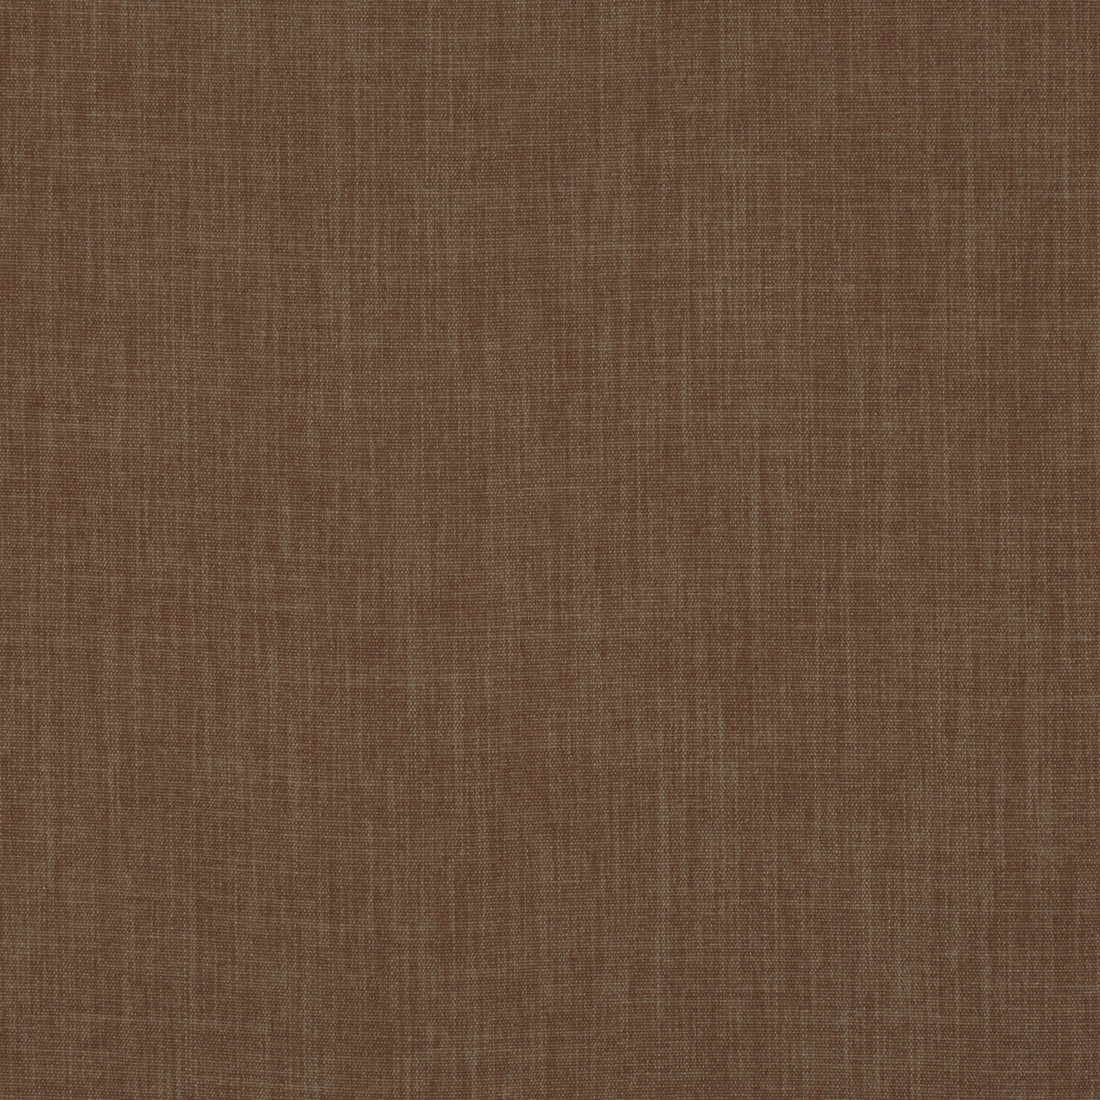 Fernshaw fabric in nutmeg color - pattern PF50410.250.0 - by Baker Lifestyle in the Notebooks collection